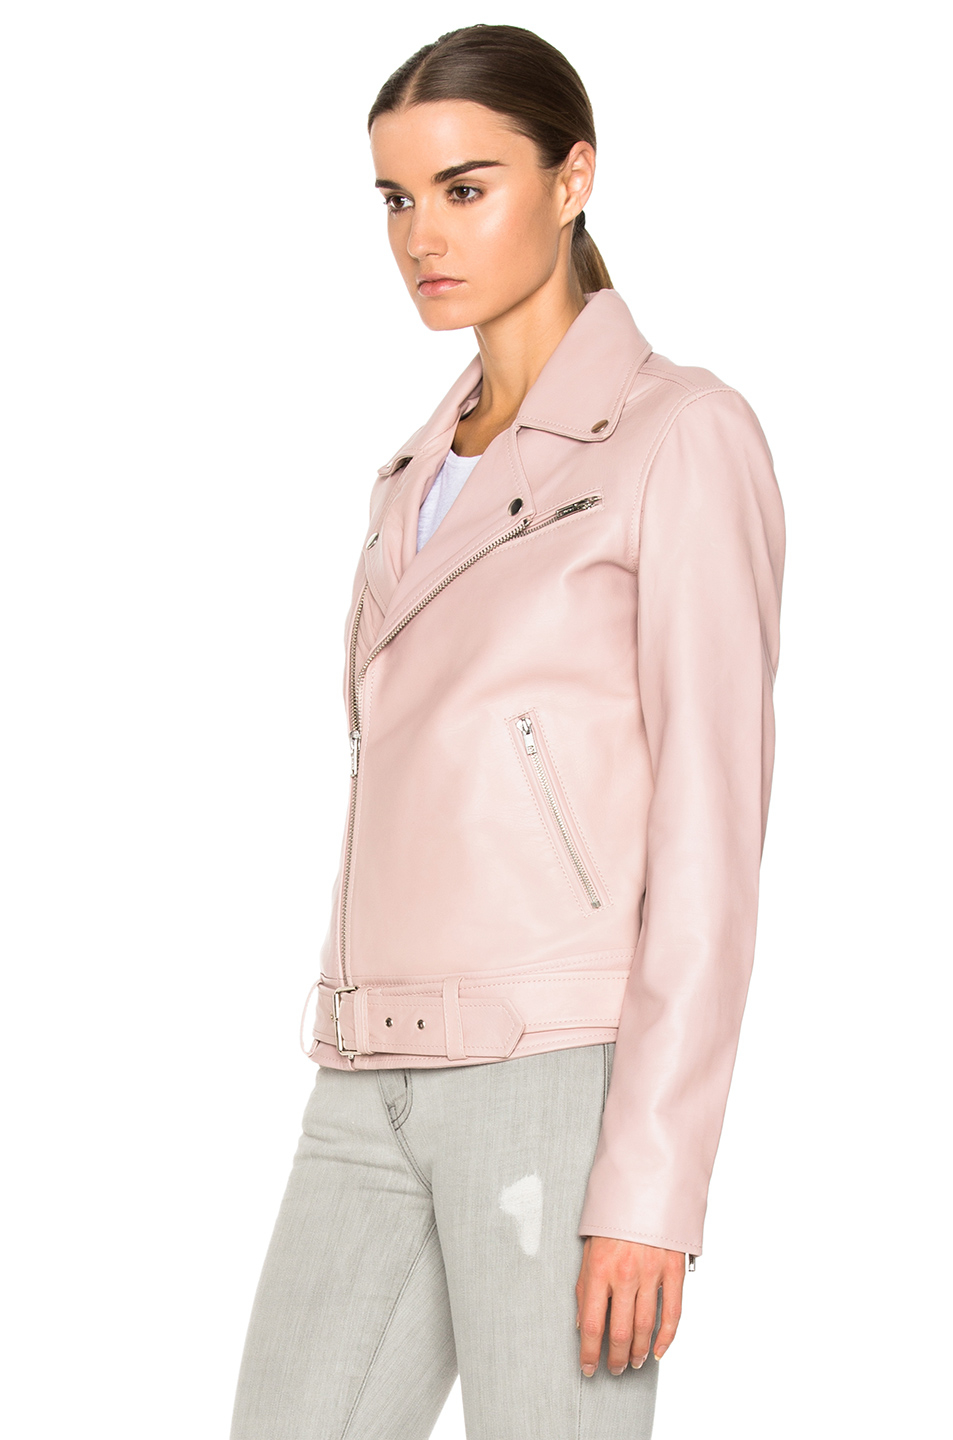 Blk dnm Leather Jacket 18 in Pink | Lyst